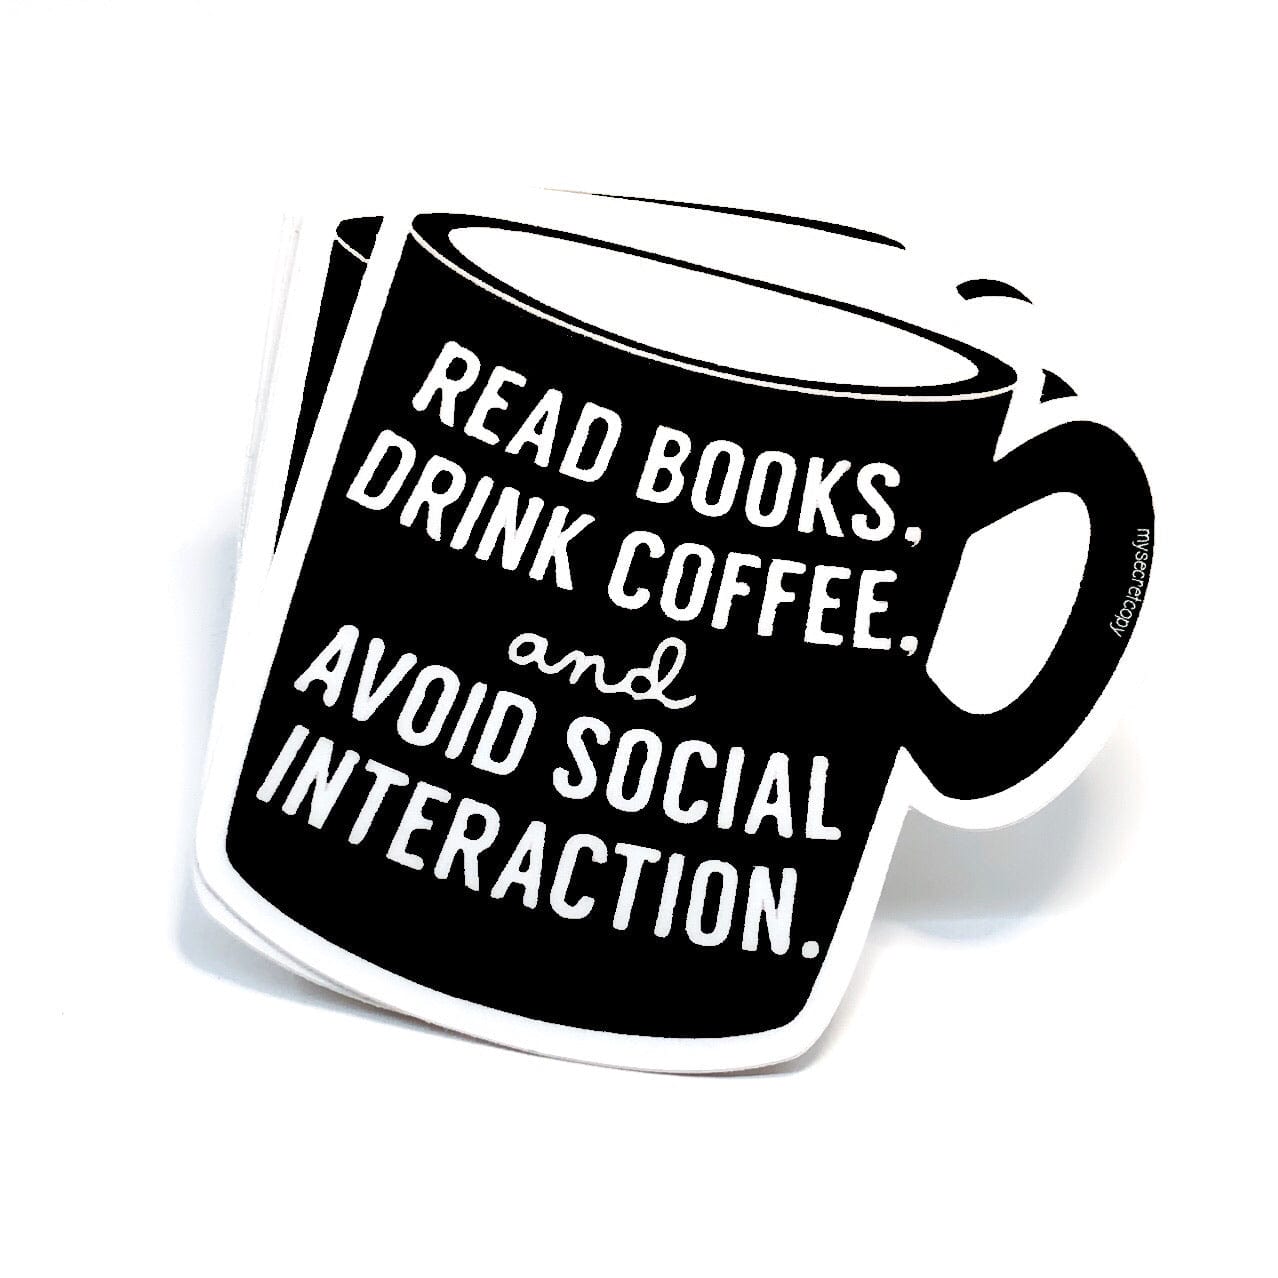 read books and drink coffee